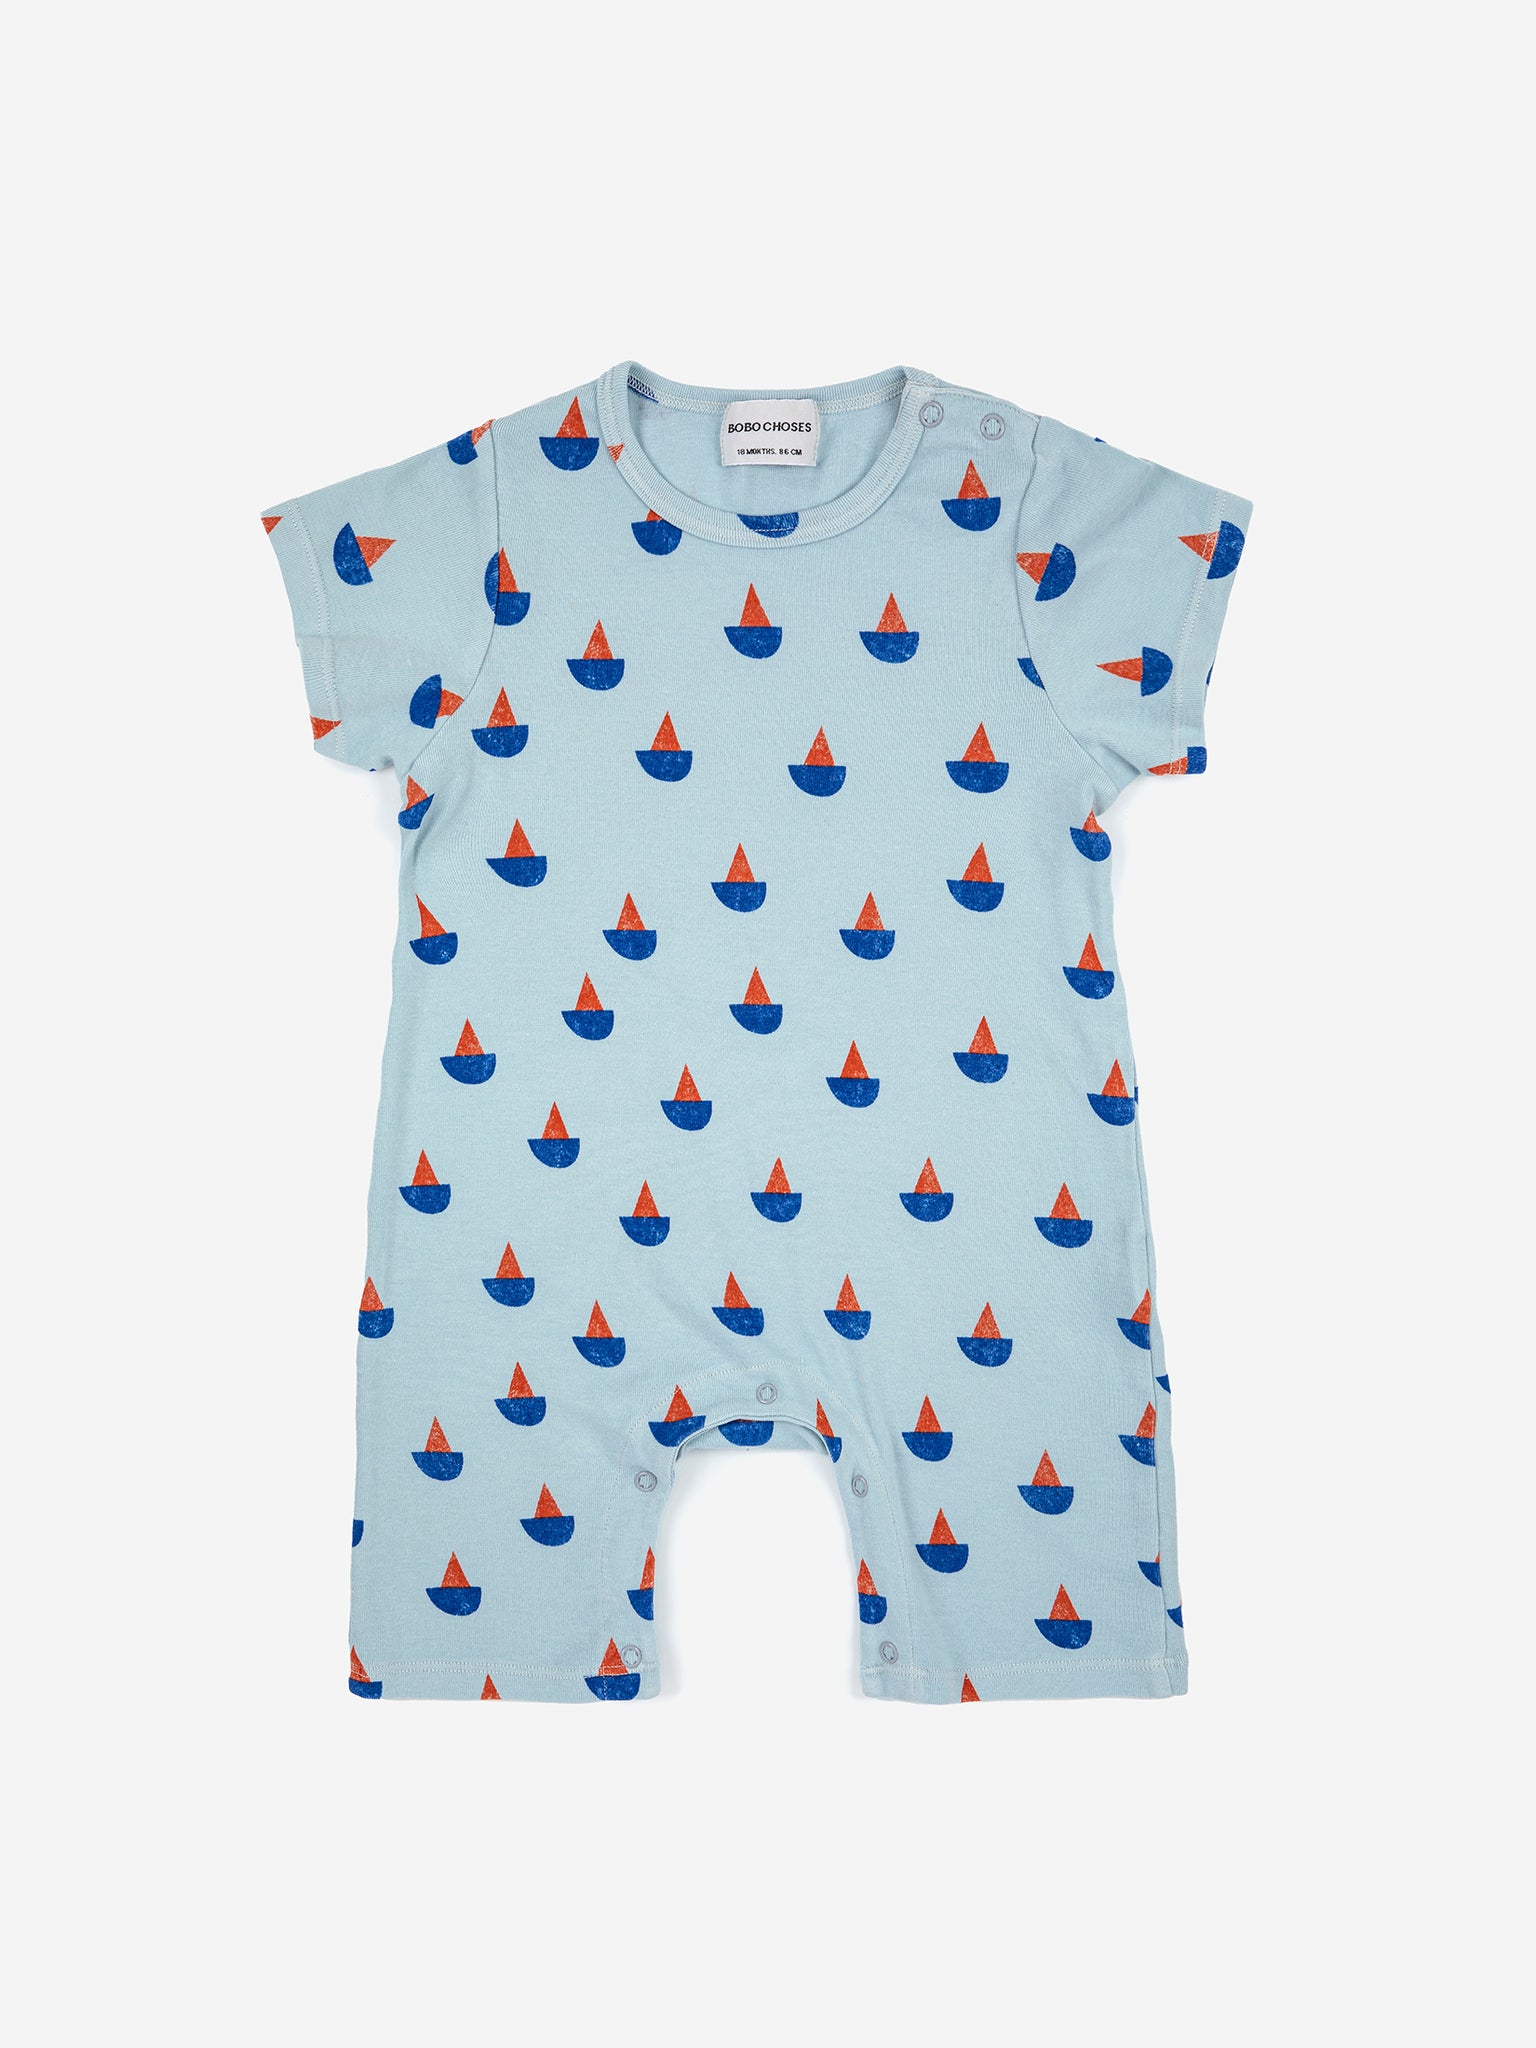 Sail Boat all over playsuit